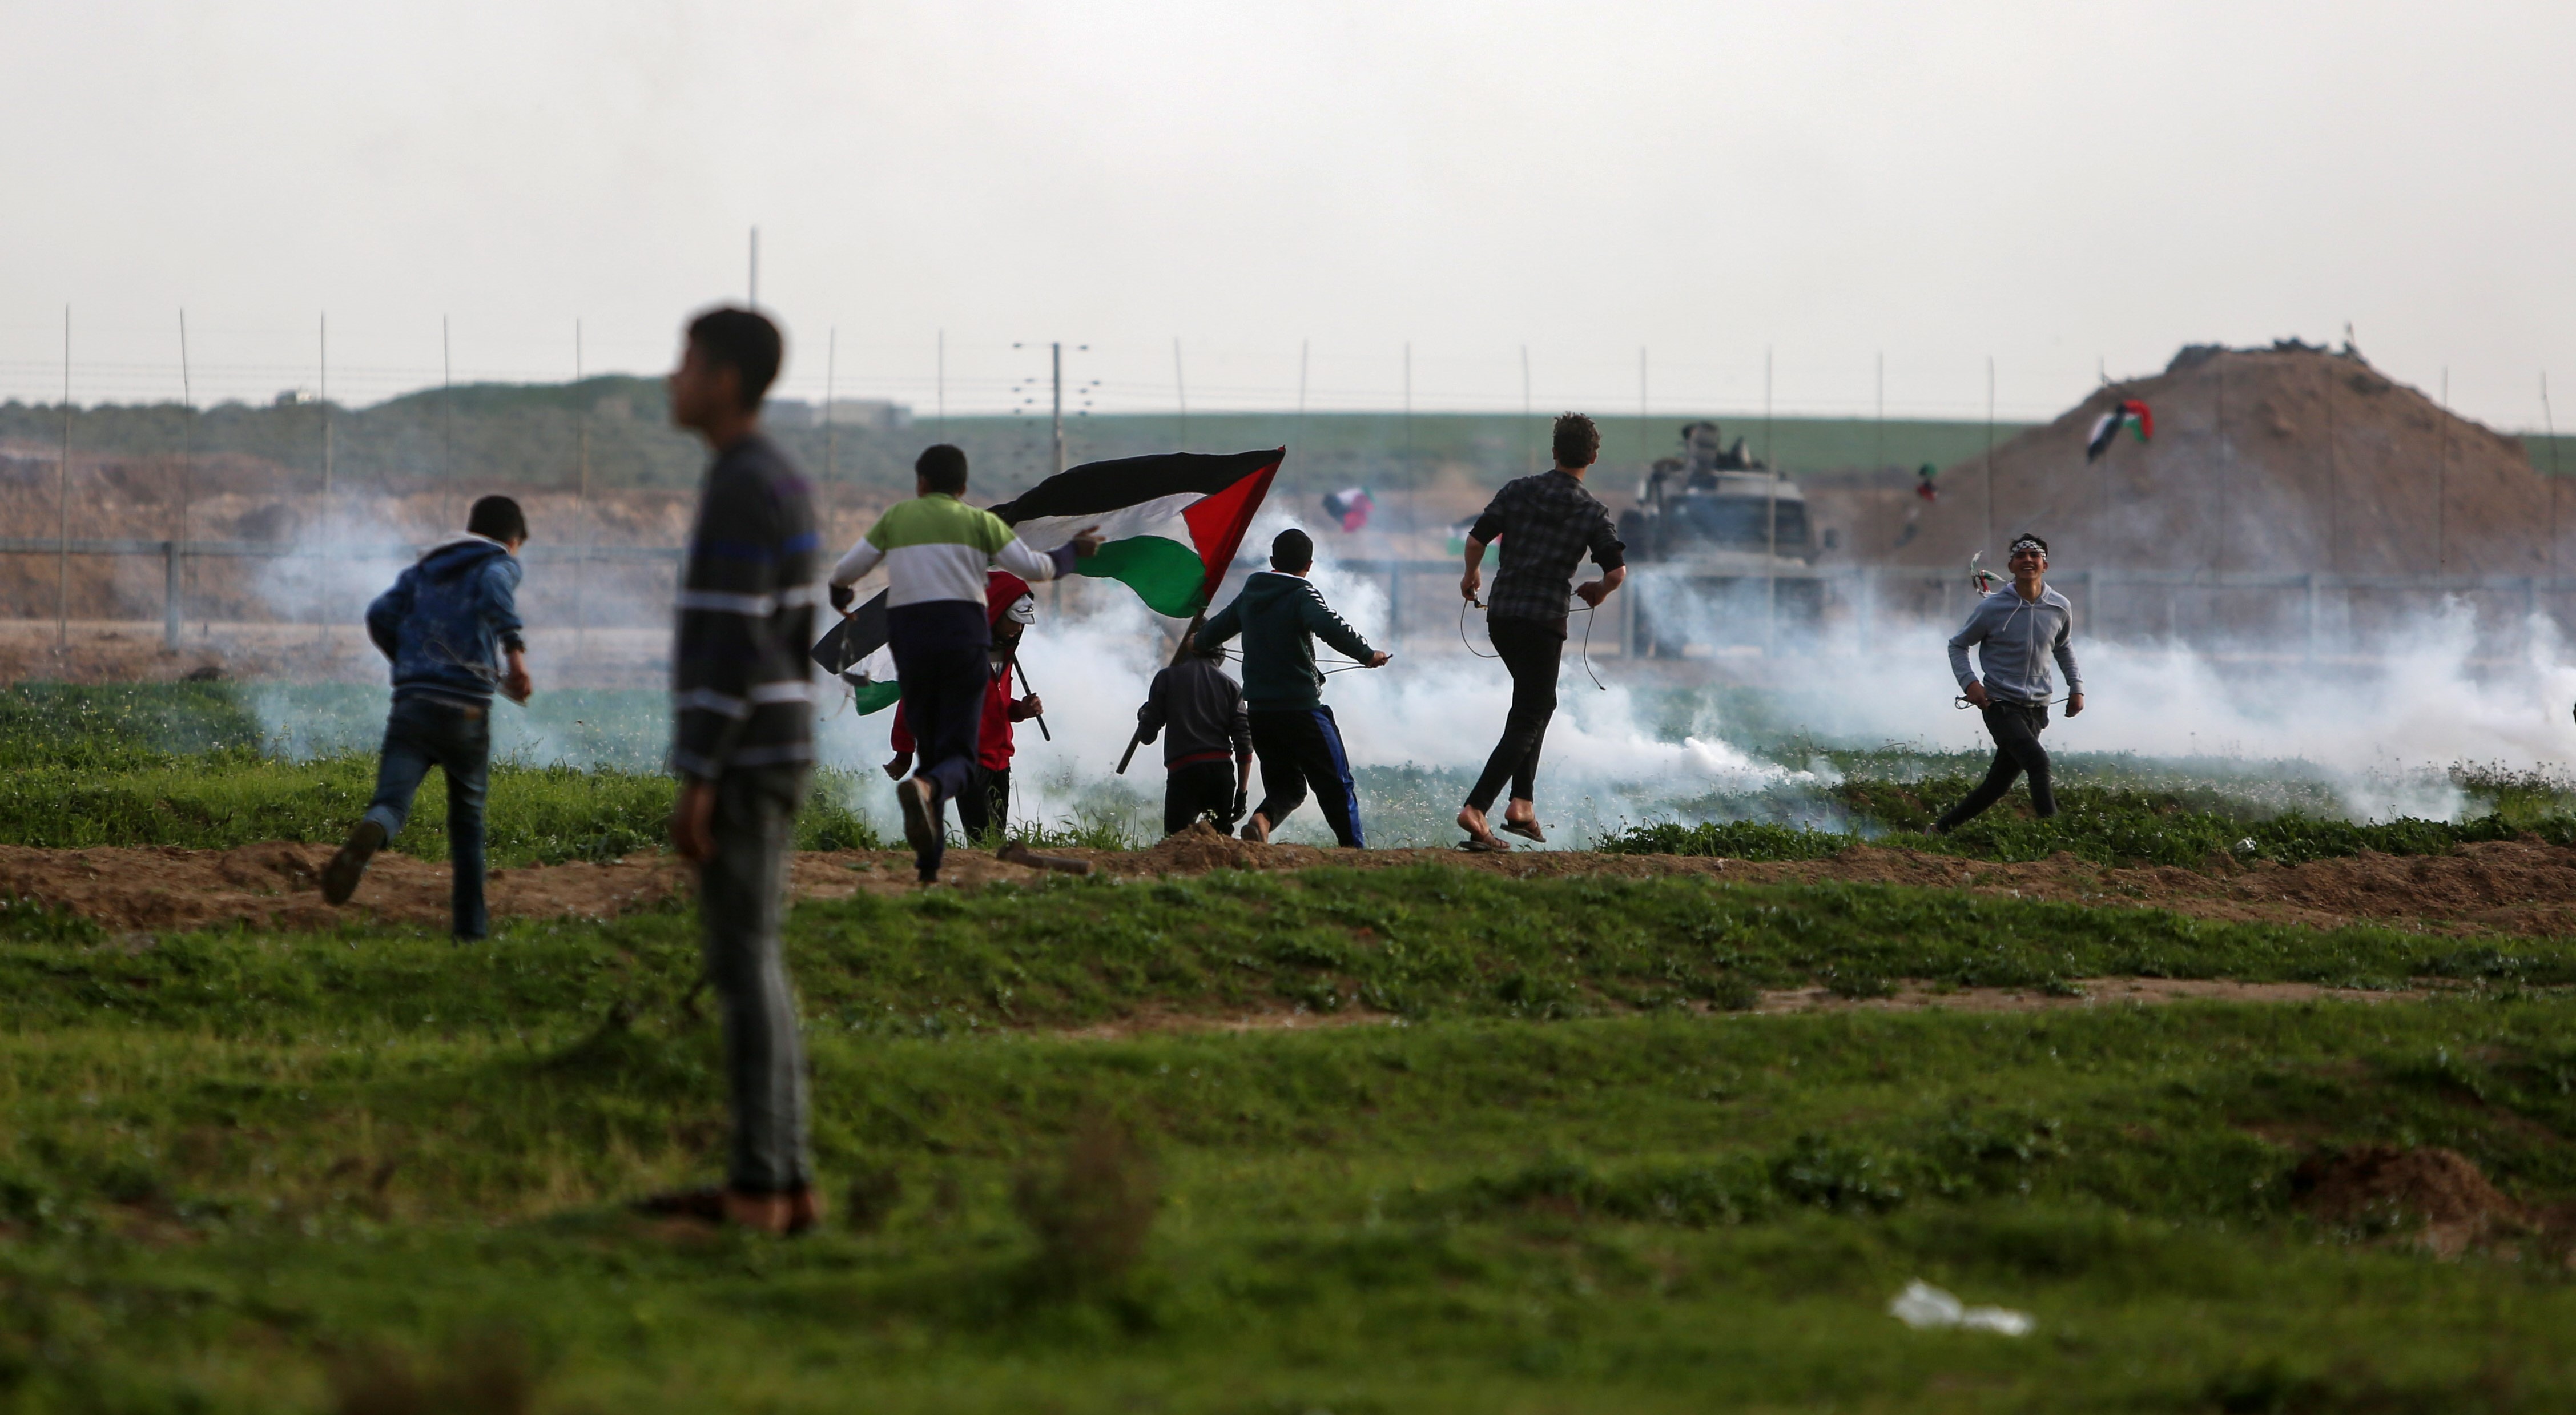 30 injured due to massive fire at Gaza border during 71st Nakba Day protests